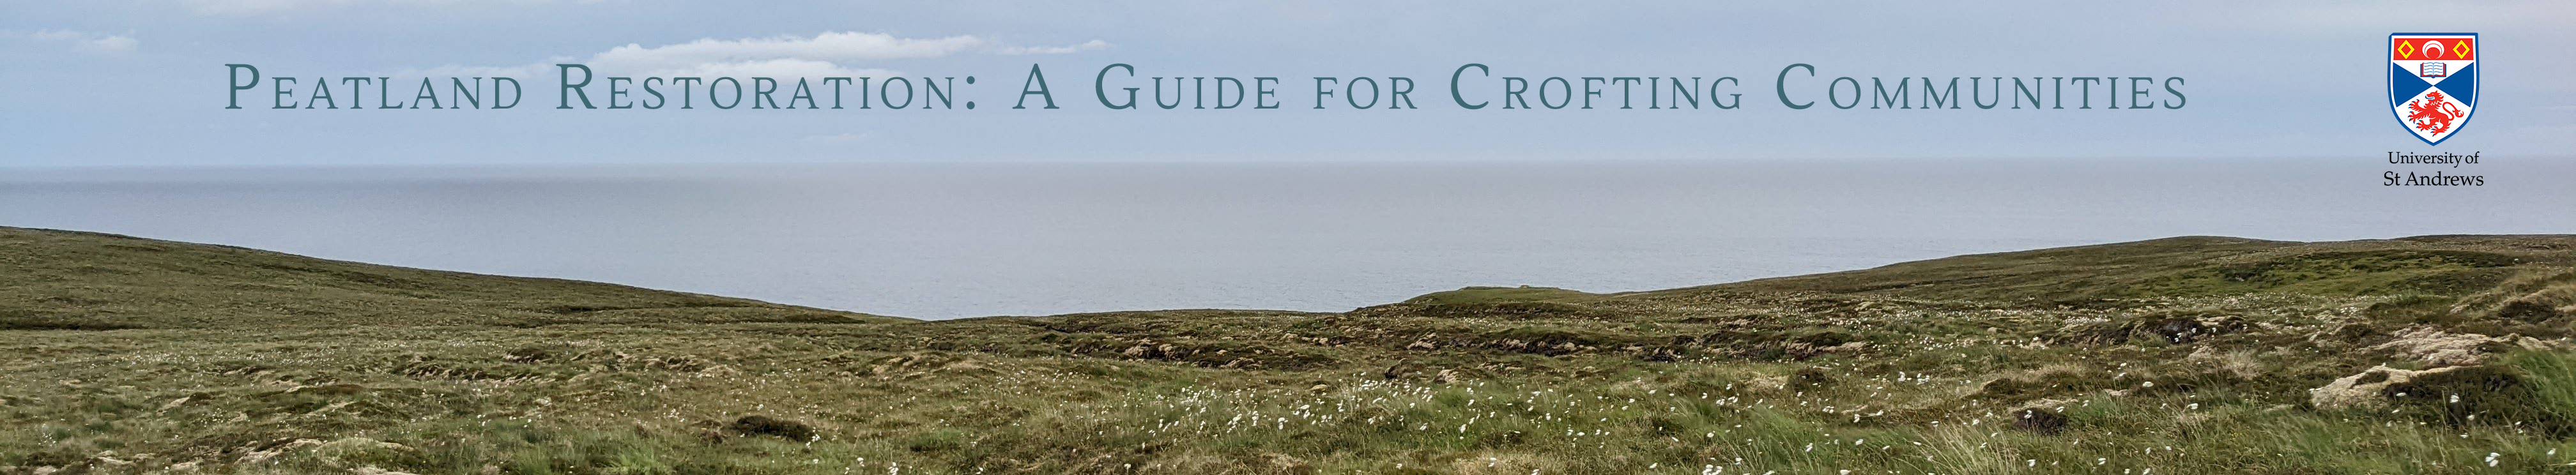 Peatland Restoration: A Guide for Crofting Communities